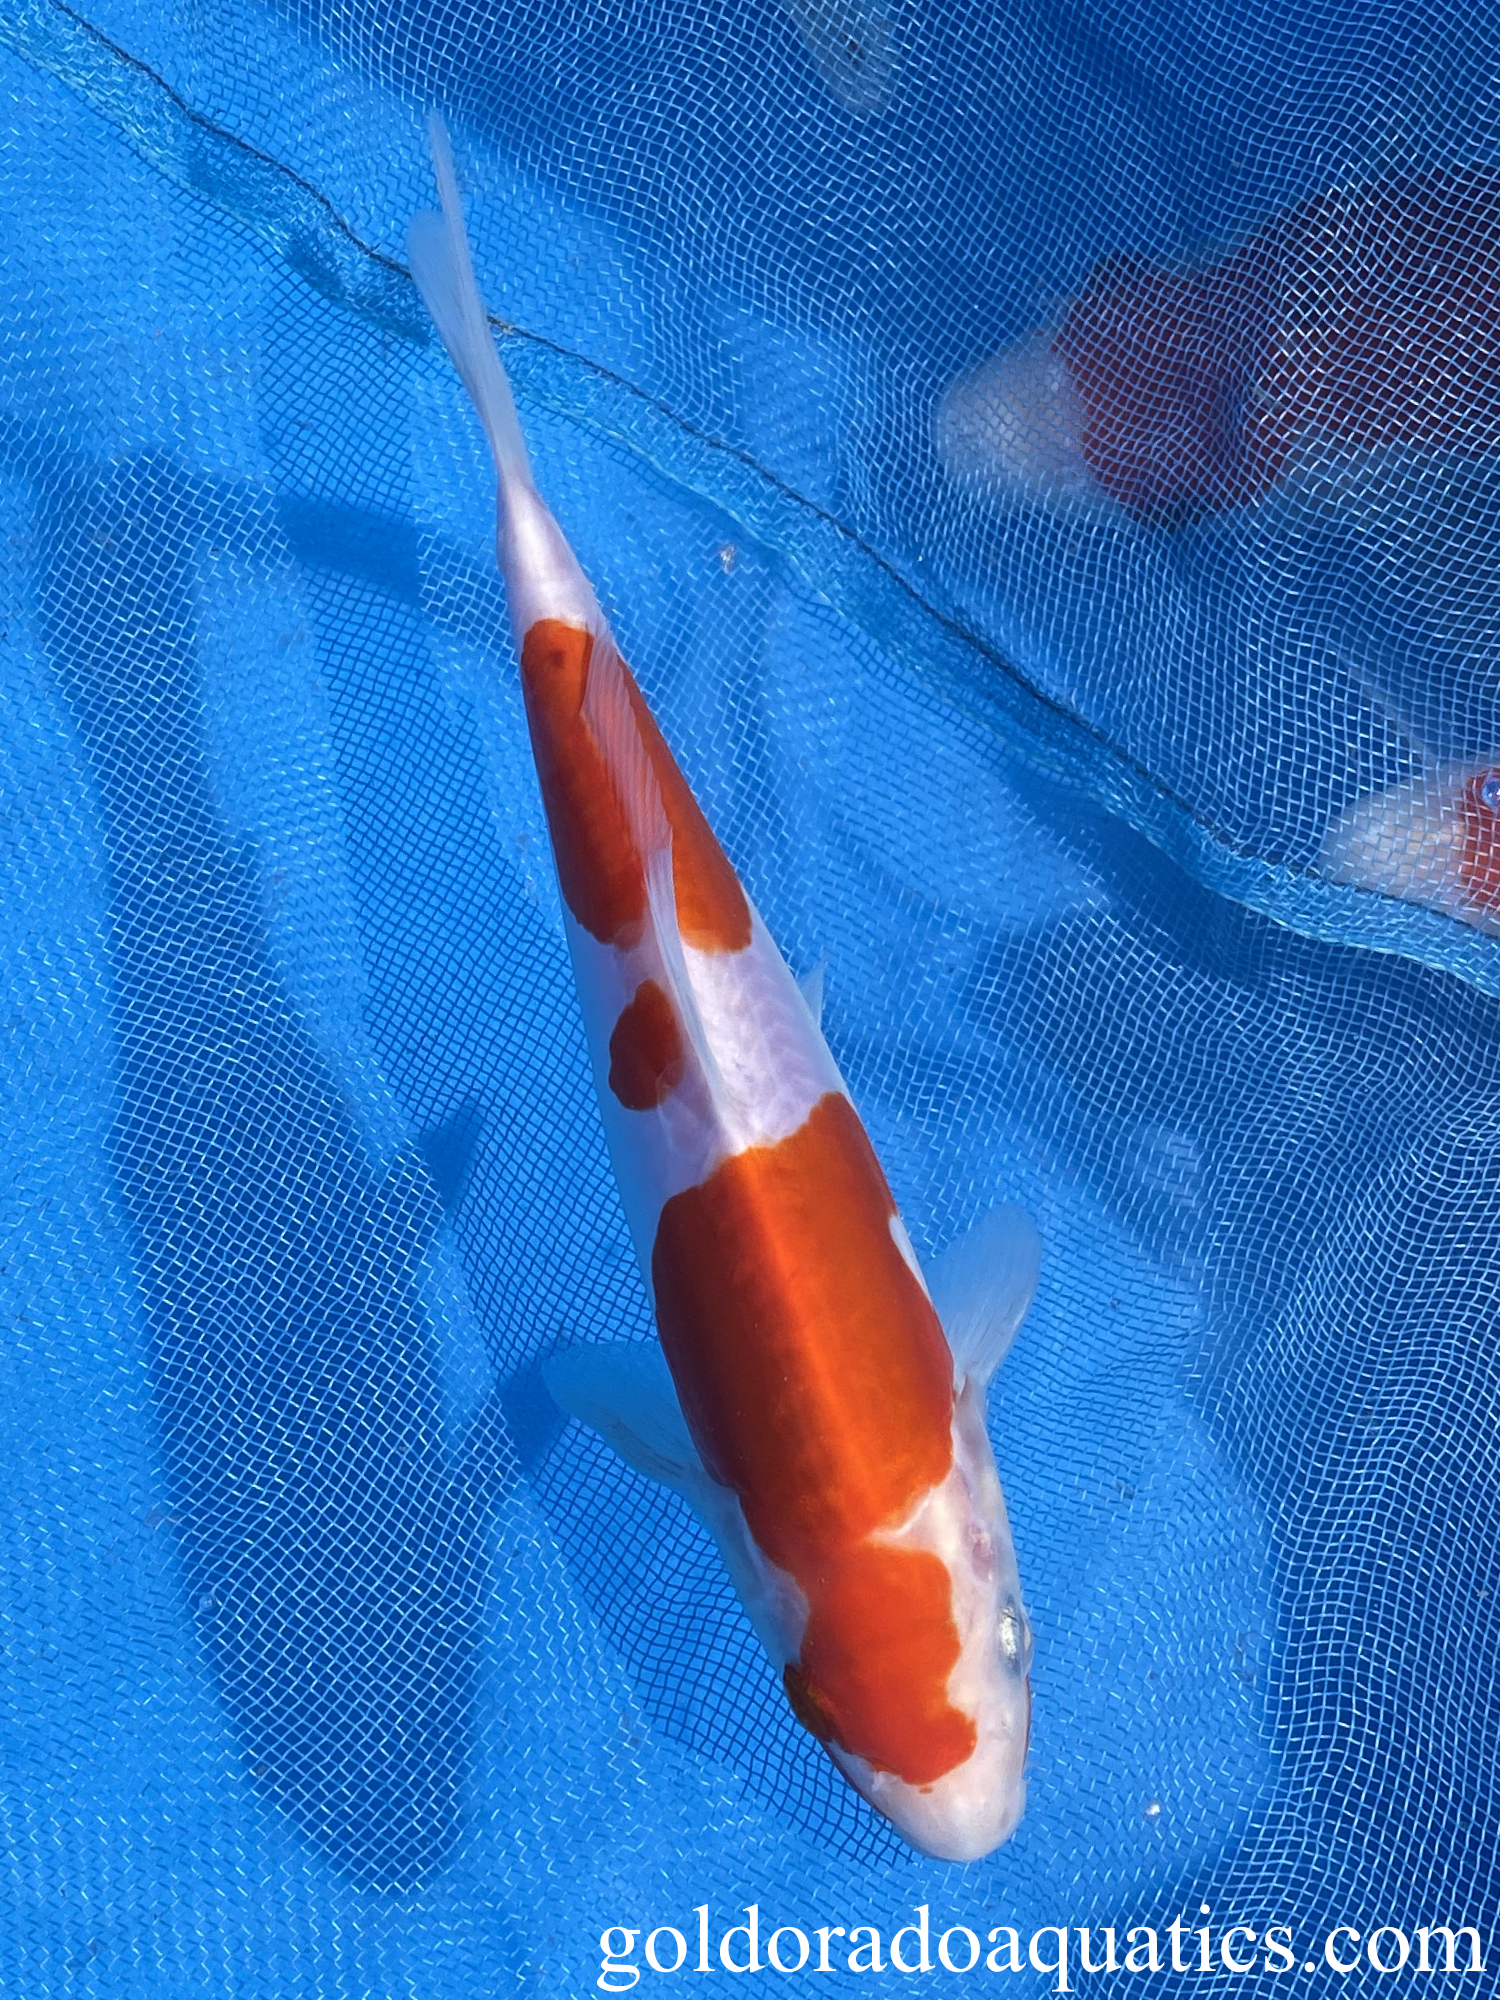 Image of a Kohaku koi fish. A fish consisting of a white base with red patterns and scaleless skin.